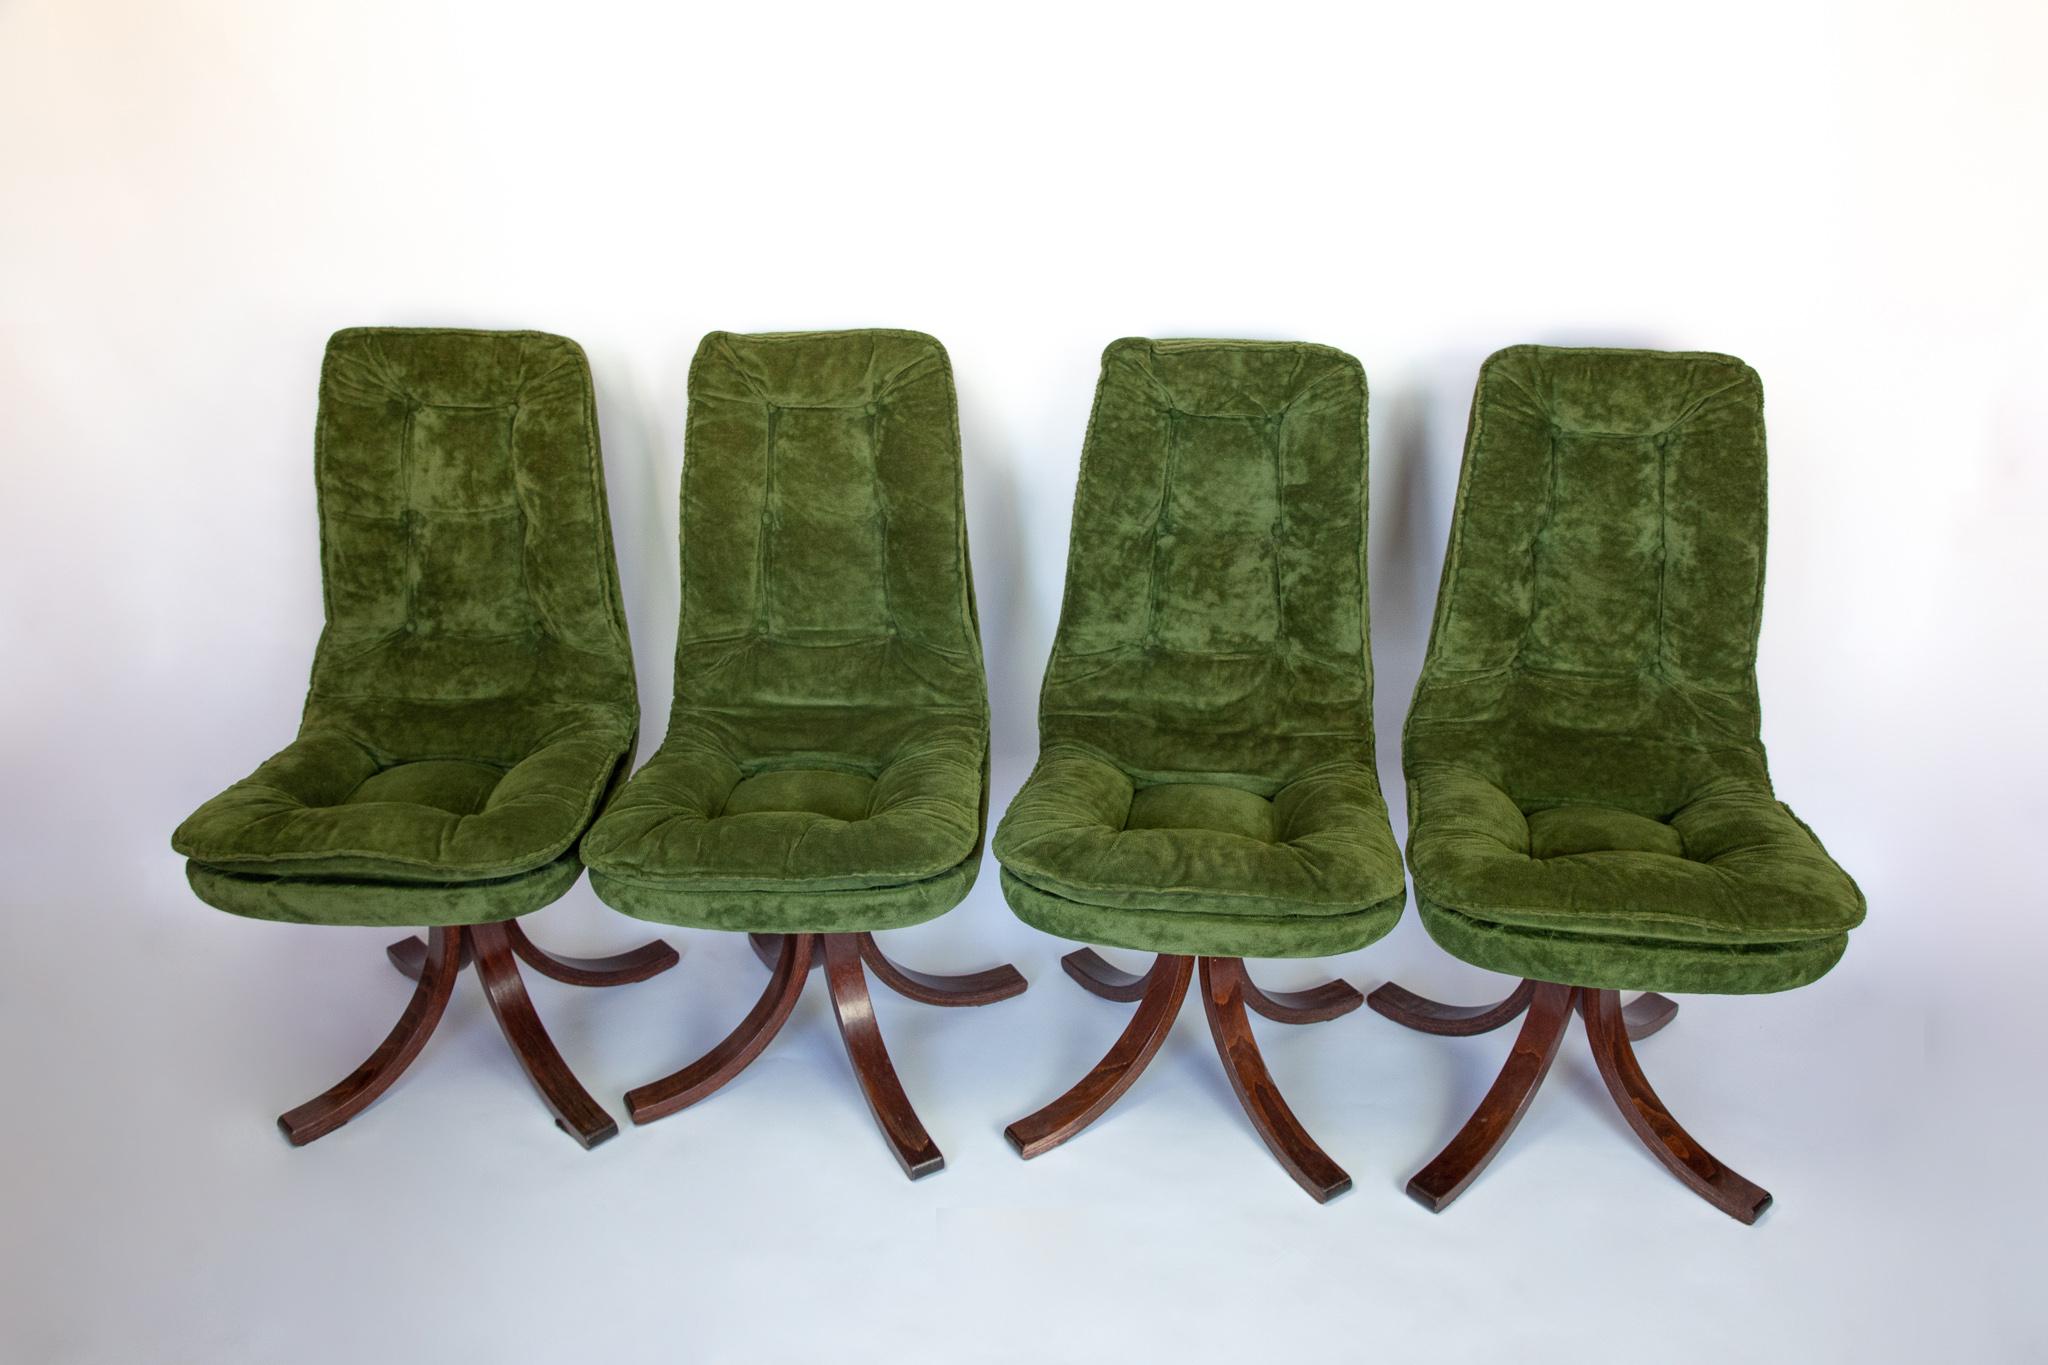 Mid Century Modern Dining Chairs in Green Velvet Upholstery, Italy, 1970s For Sale 2